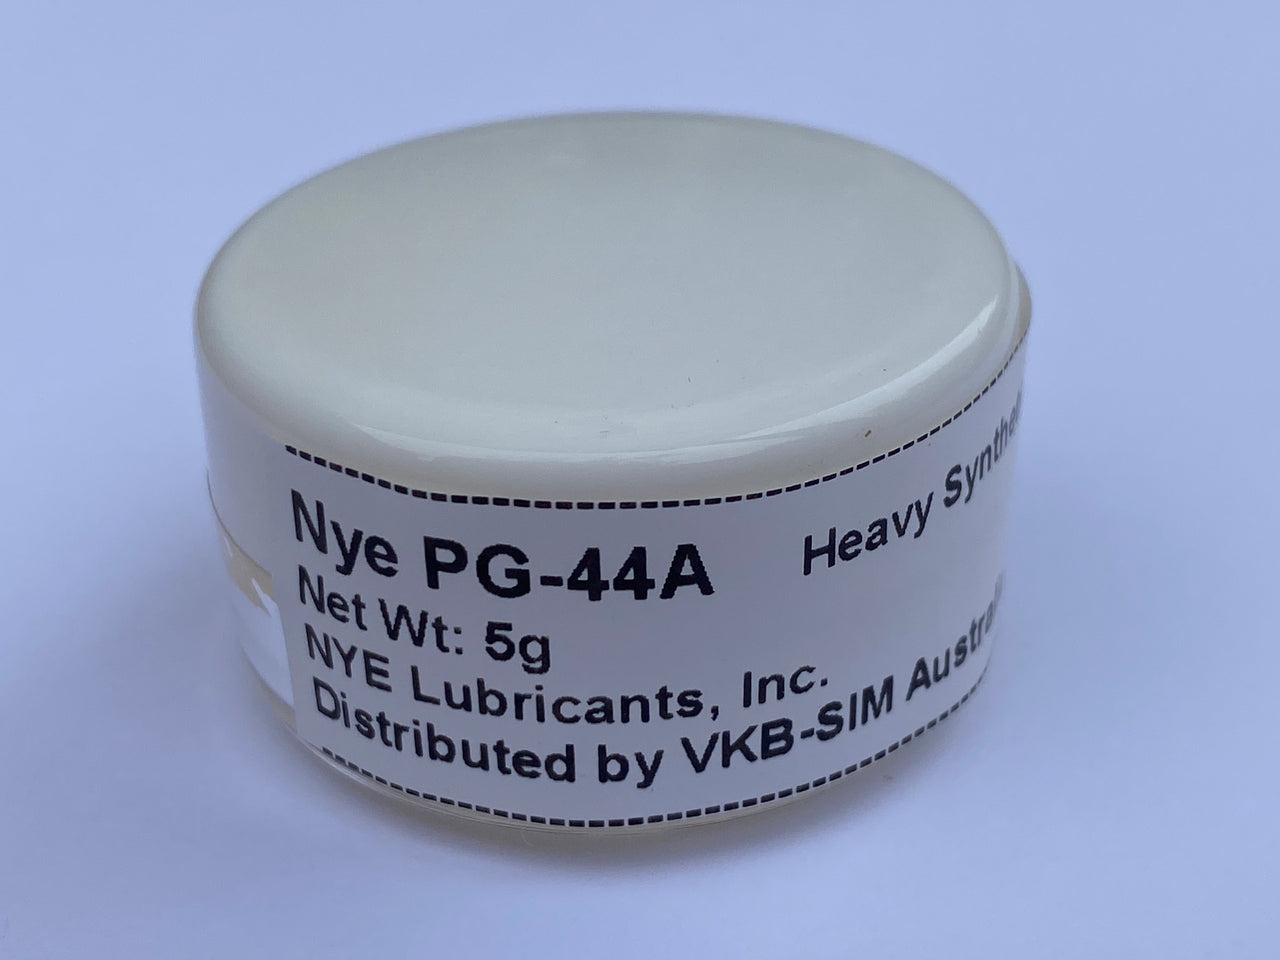 Nye PG-44A heavy synthetic damping grease